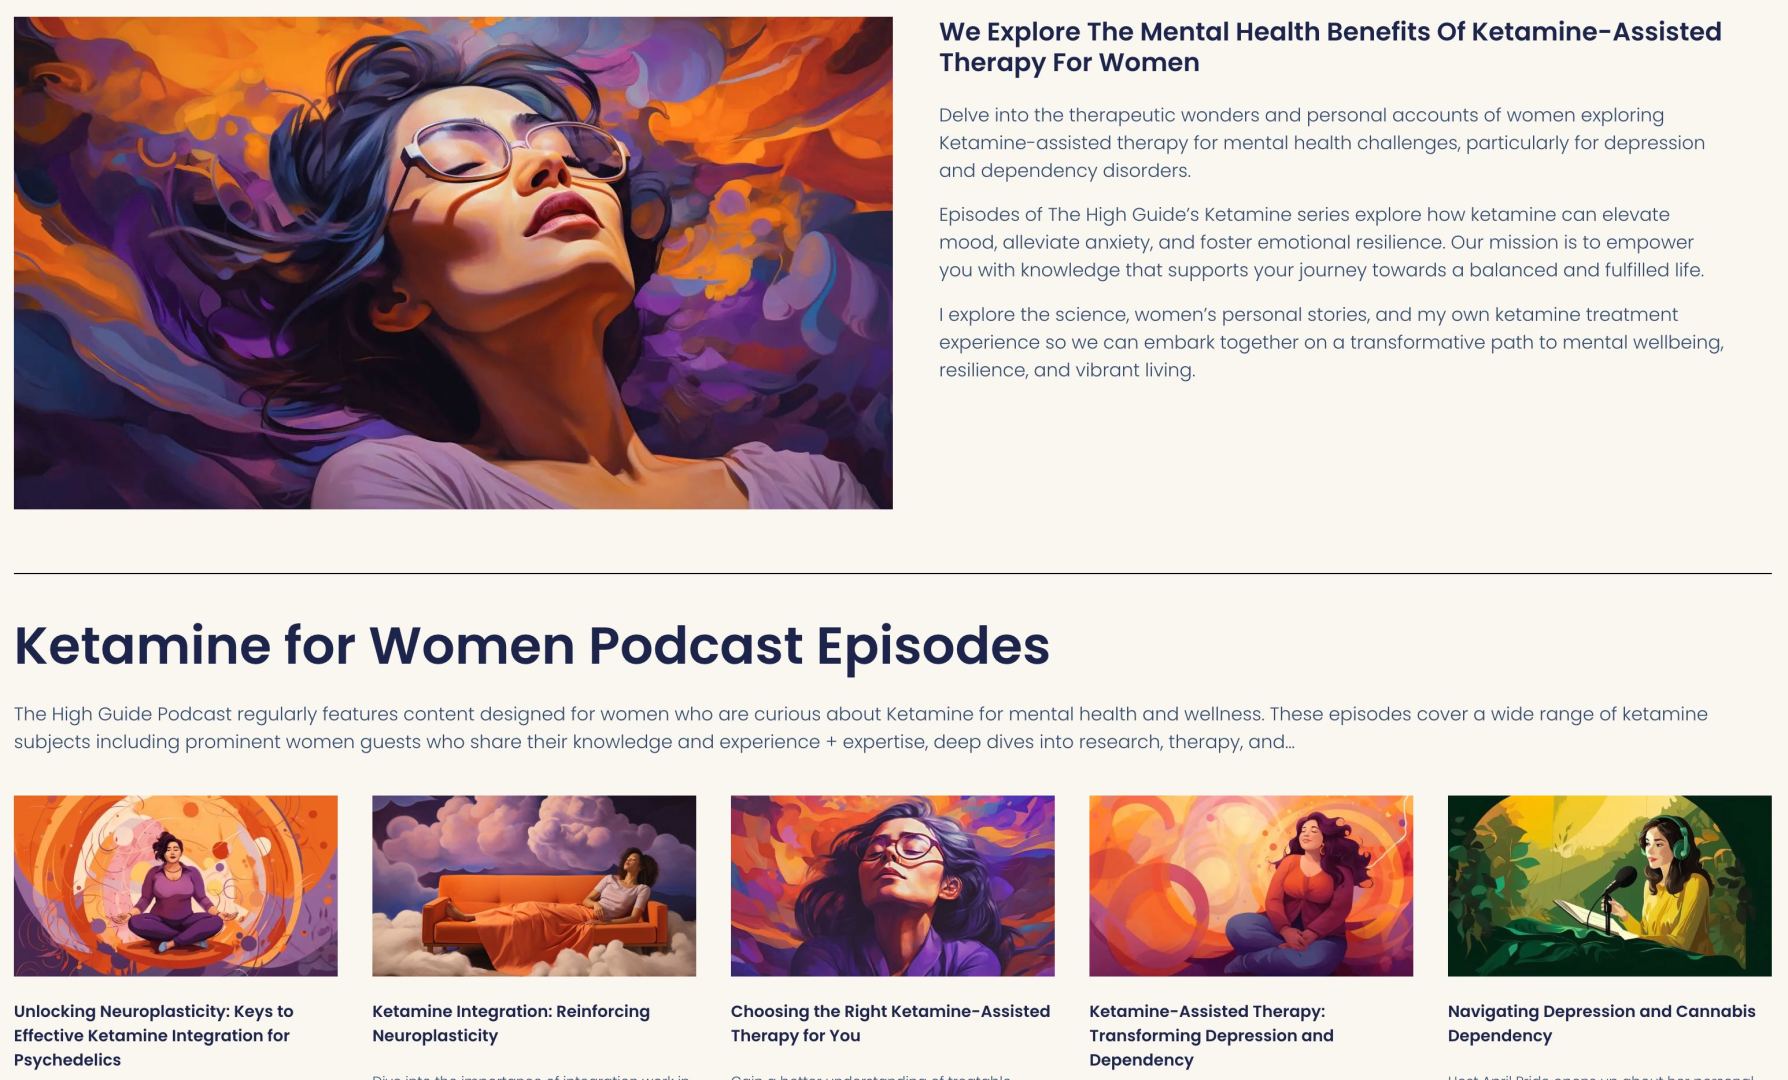 screenshot of the High Guide podcast website showing images generated using AI for Ketamine podcast episodes